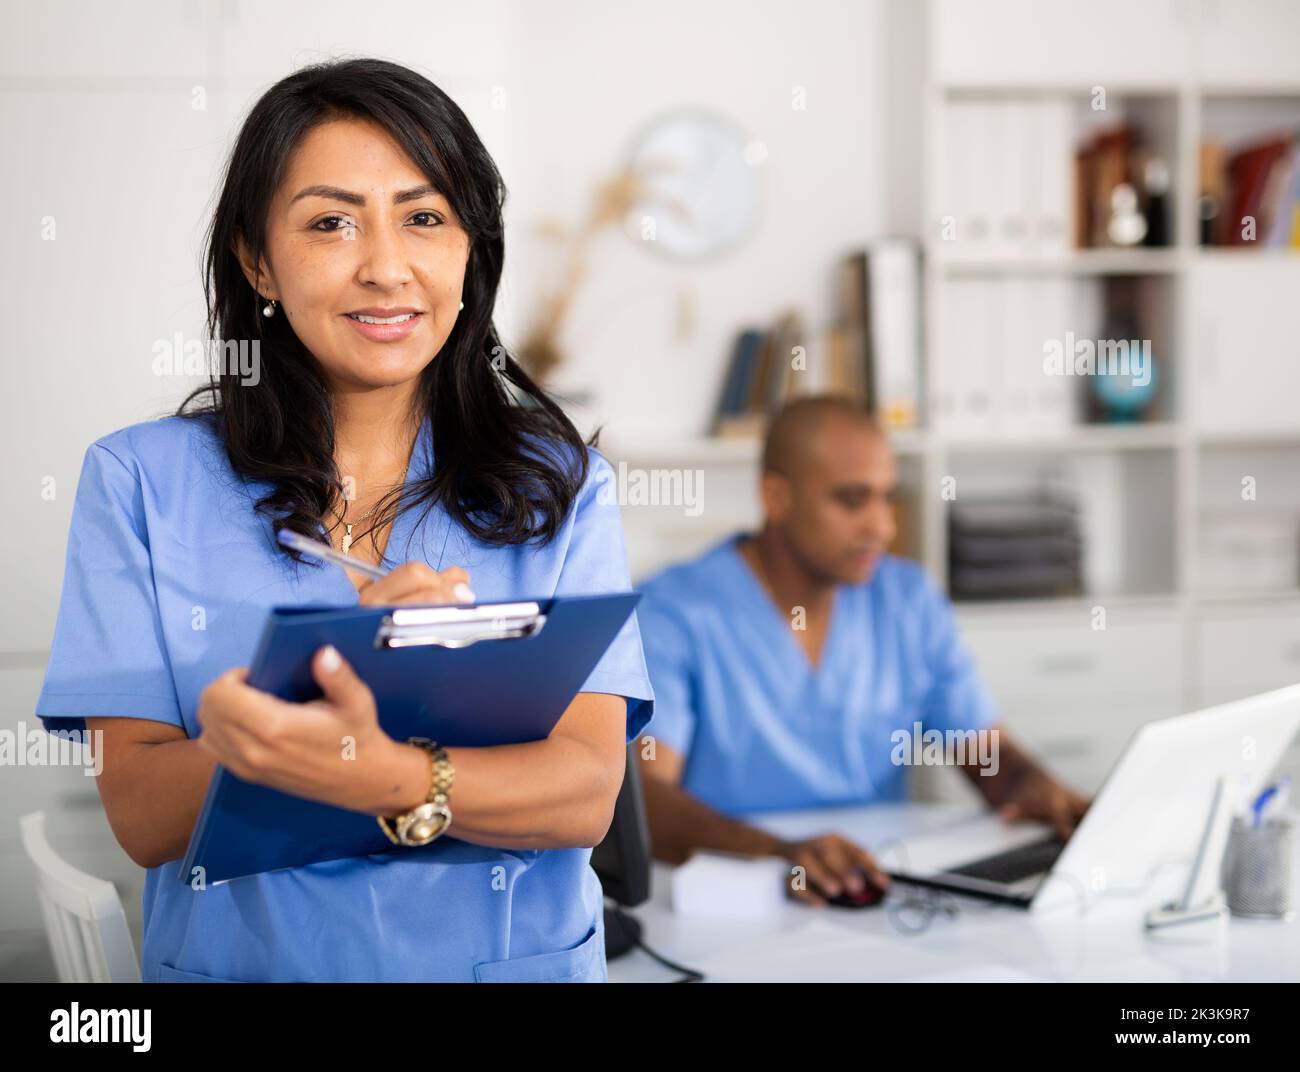 Portrait of female therapist with folder for papers Stock Photo